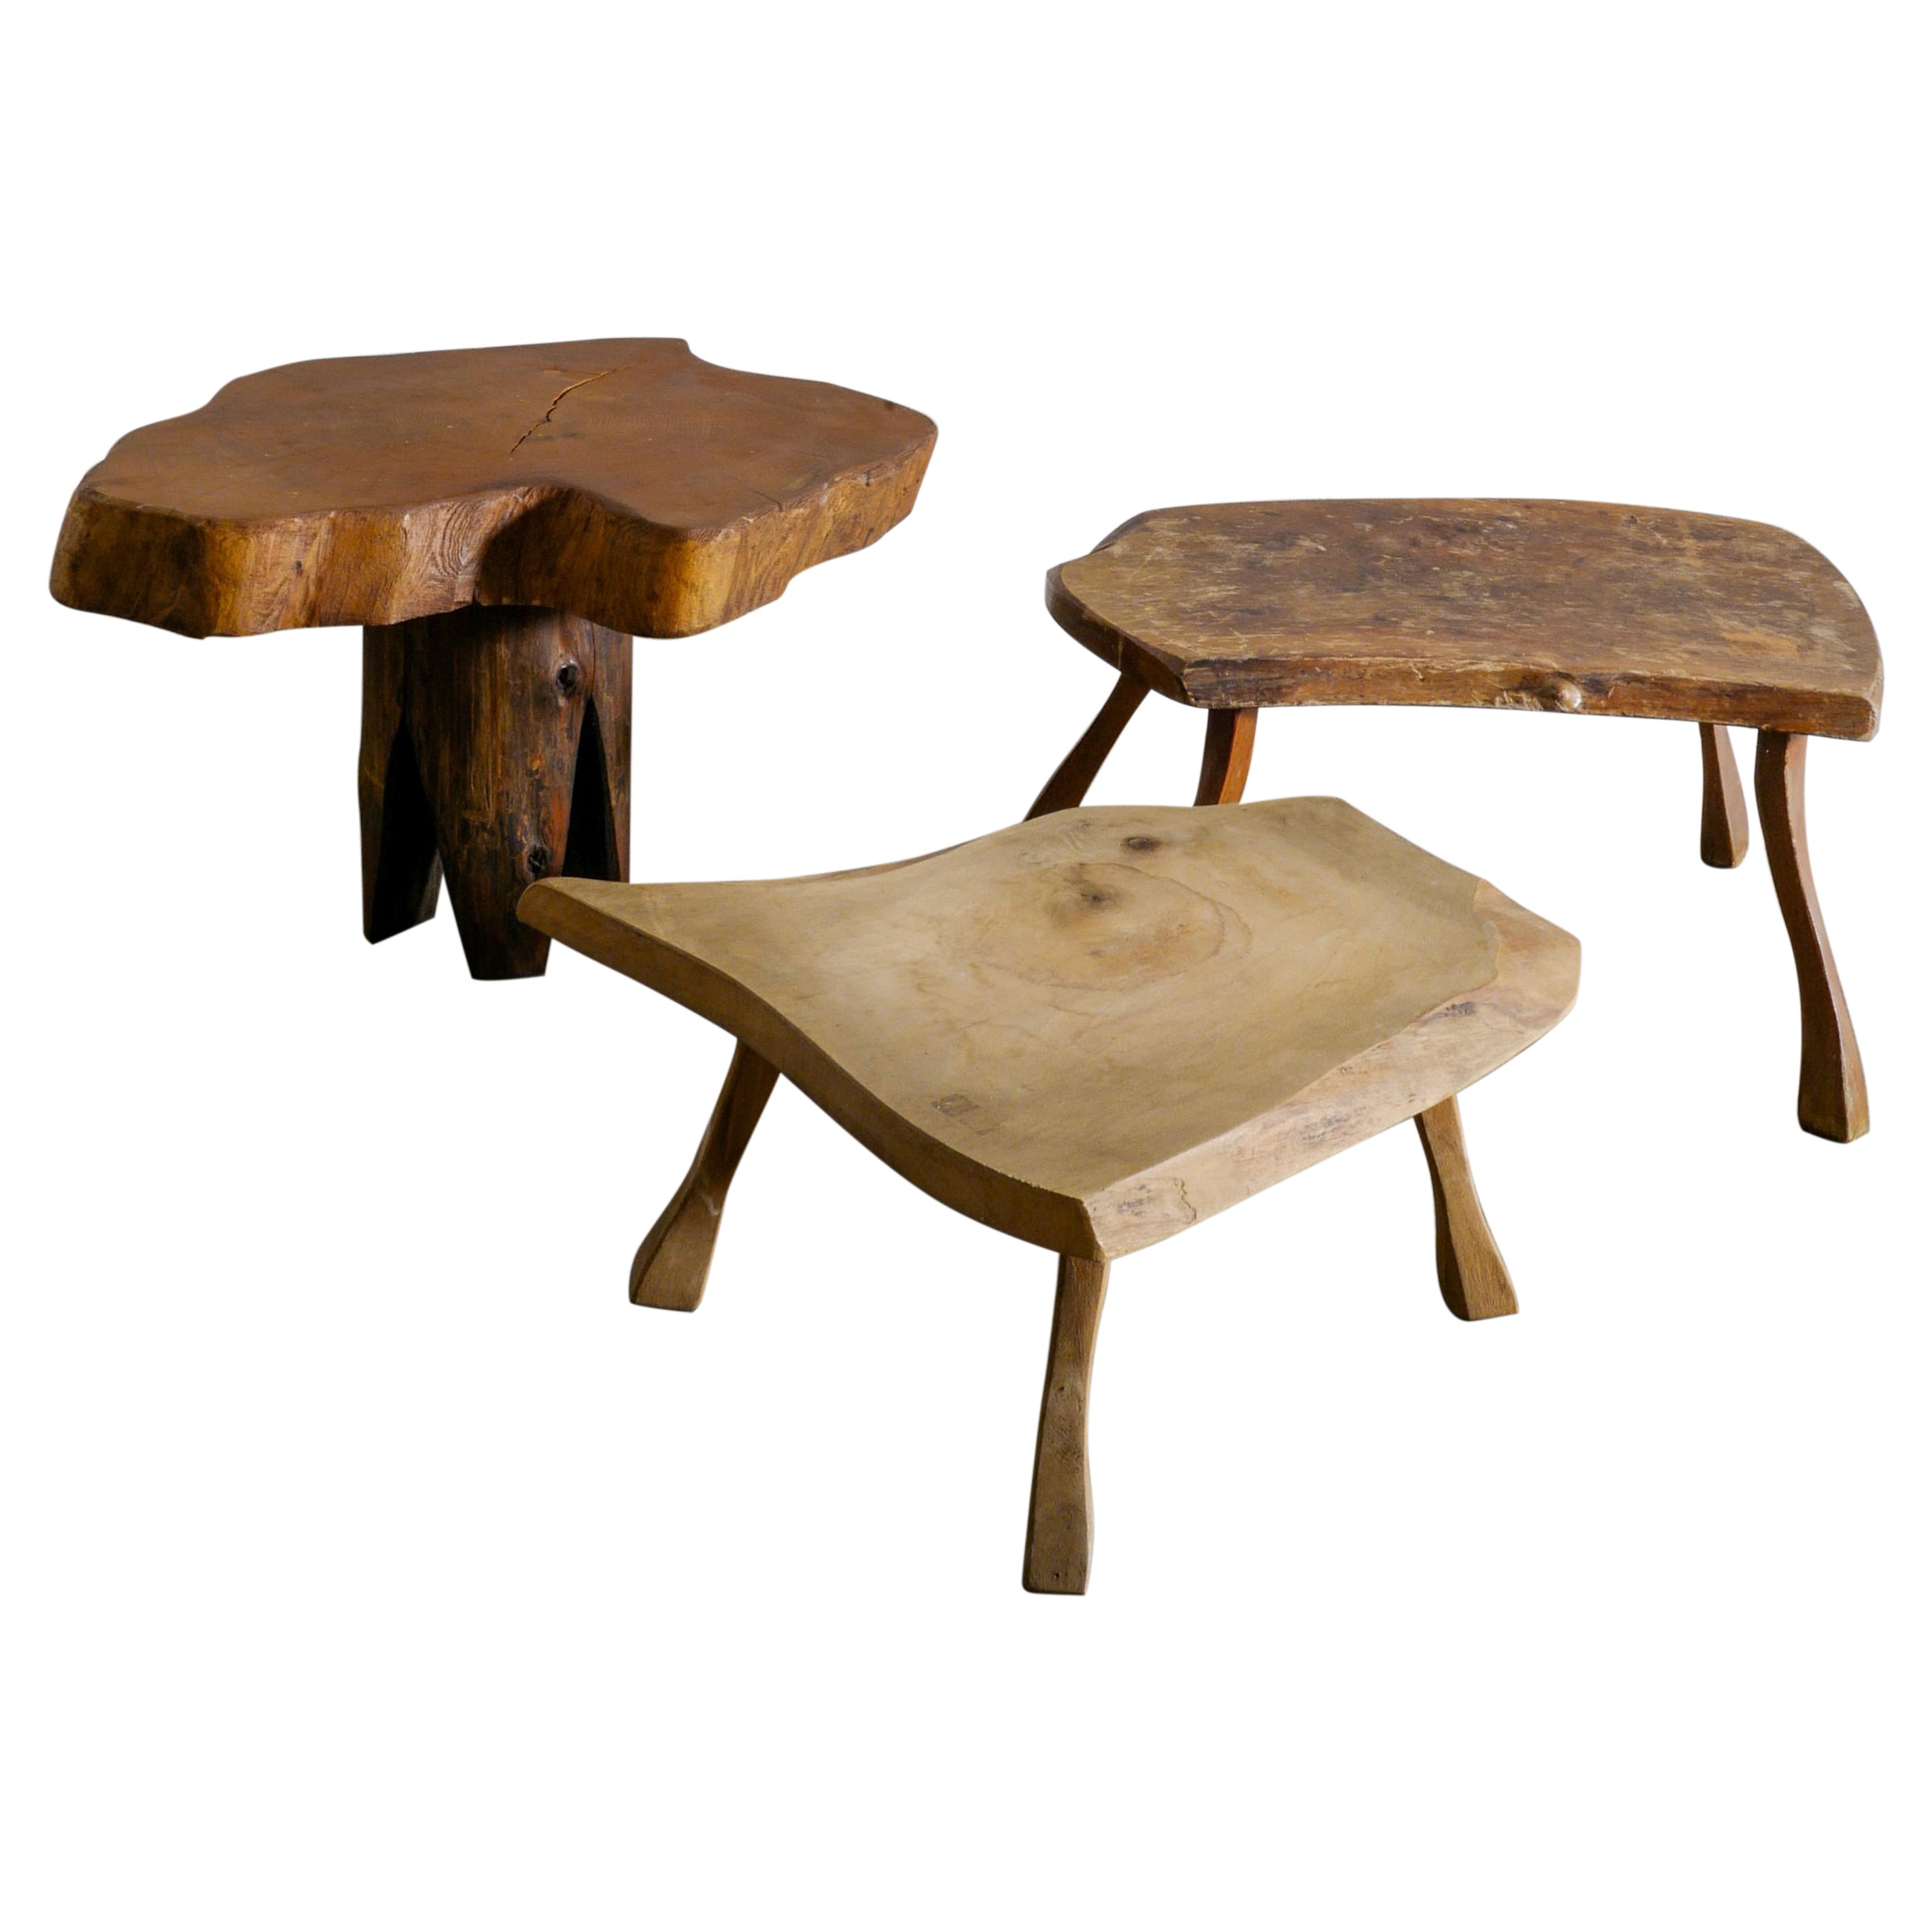 Trio French Wooden Side Sofa Tables in a Wabi Sabi Style Produced in France 1950